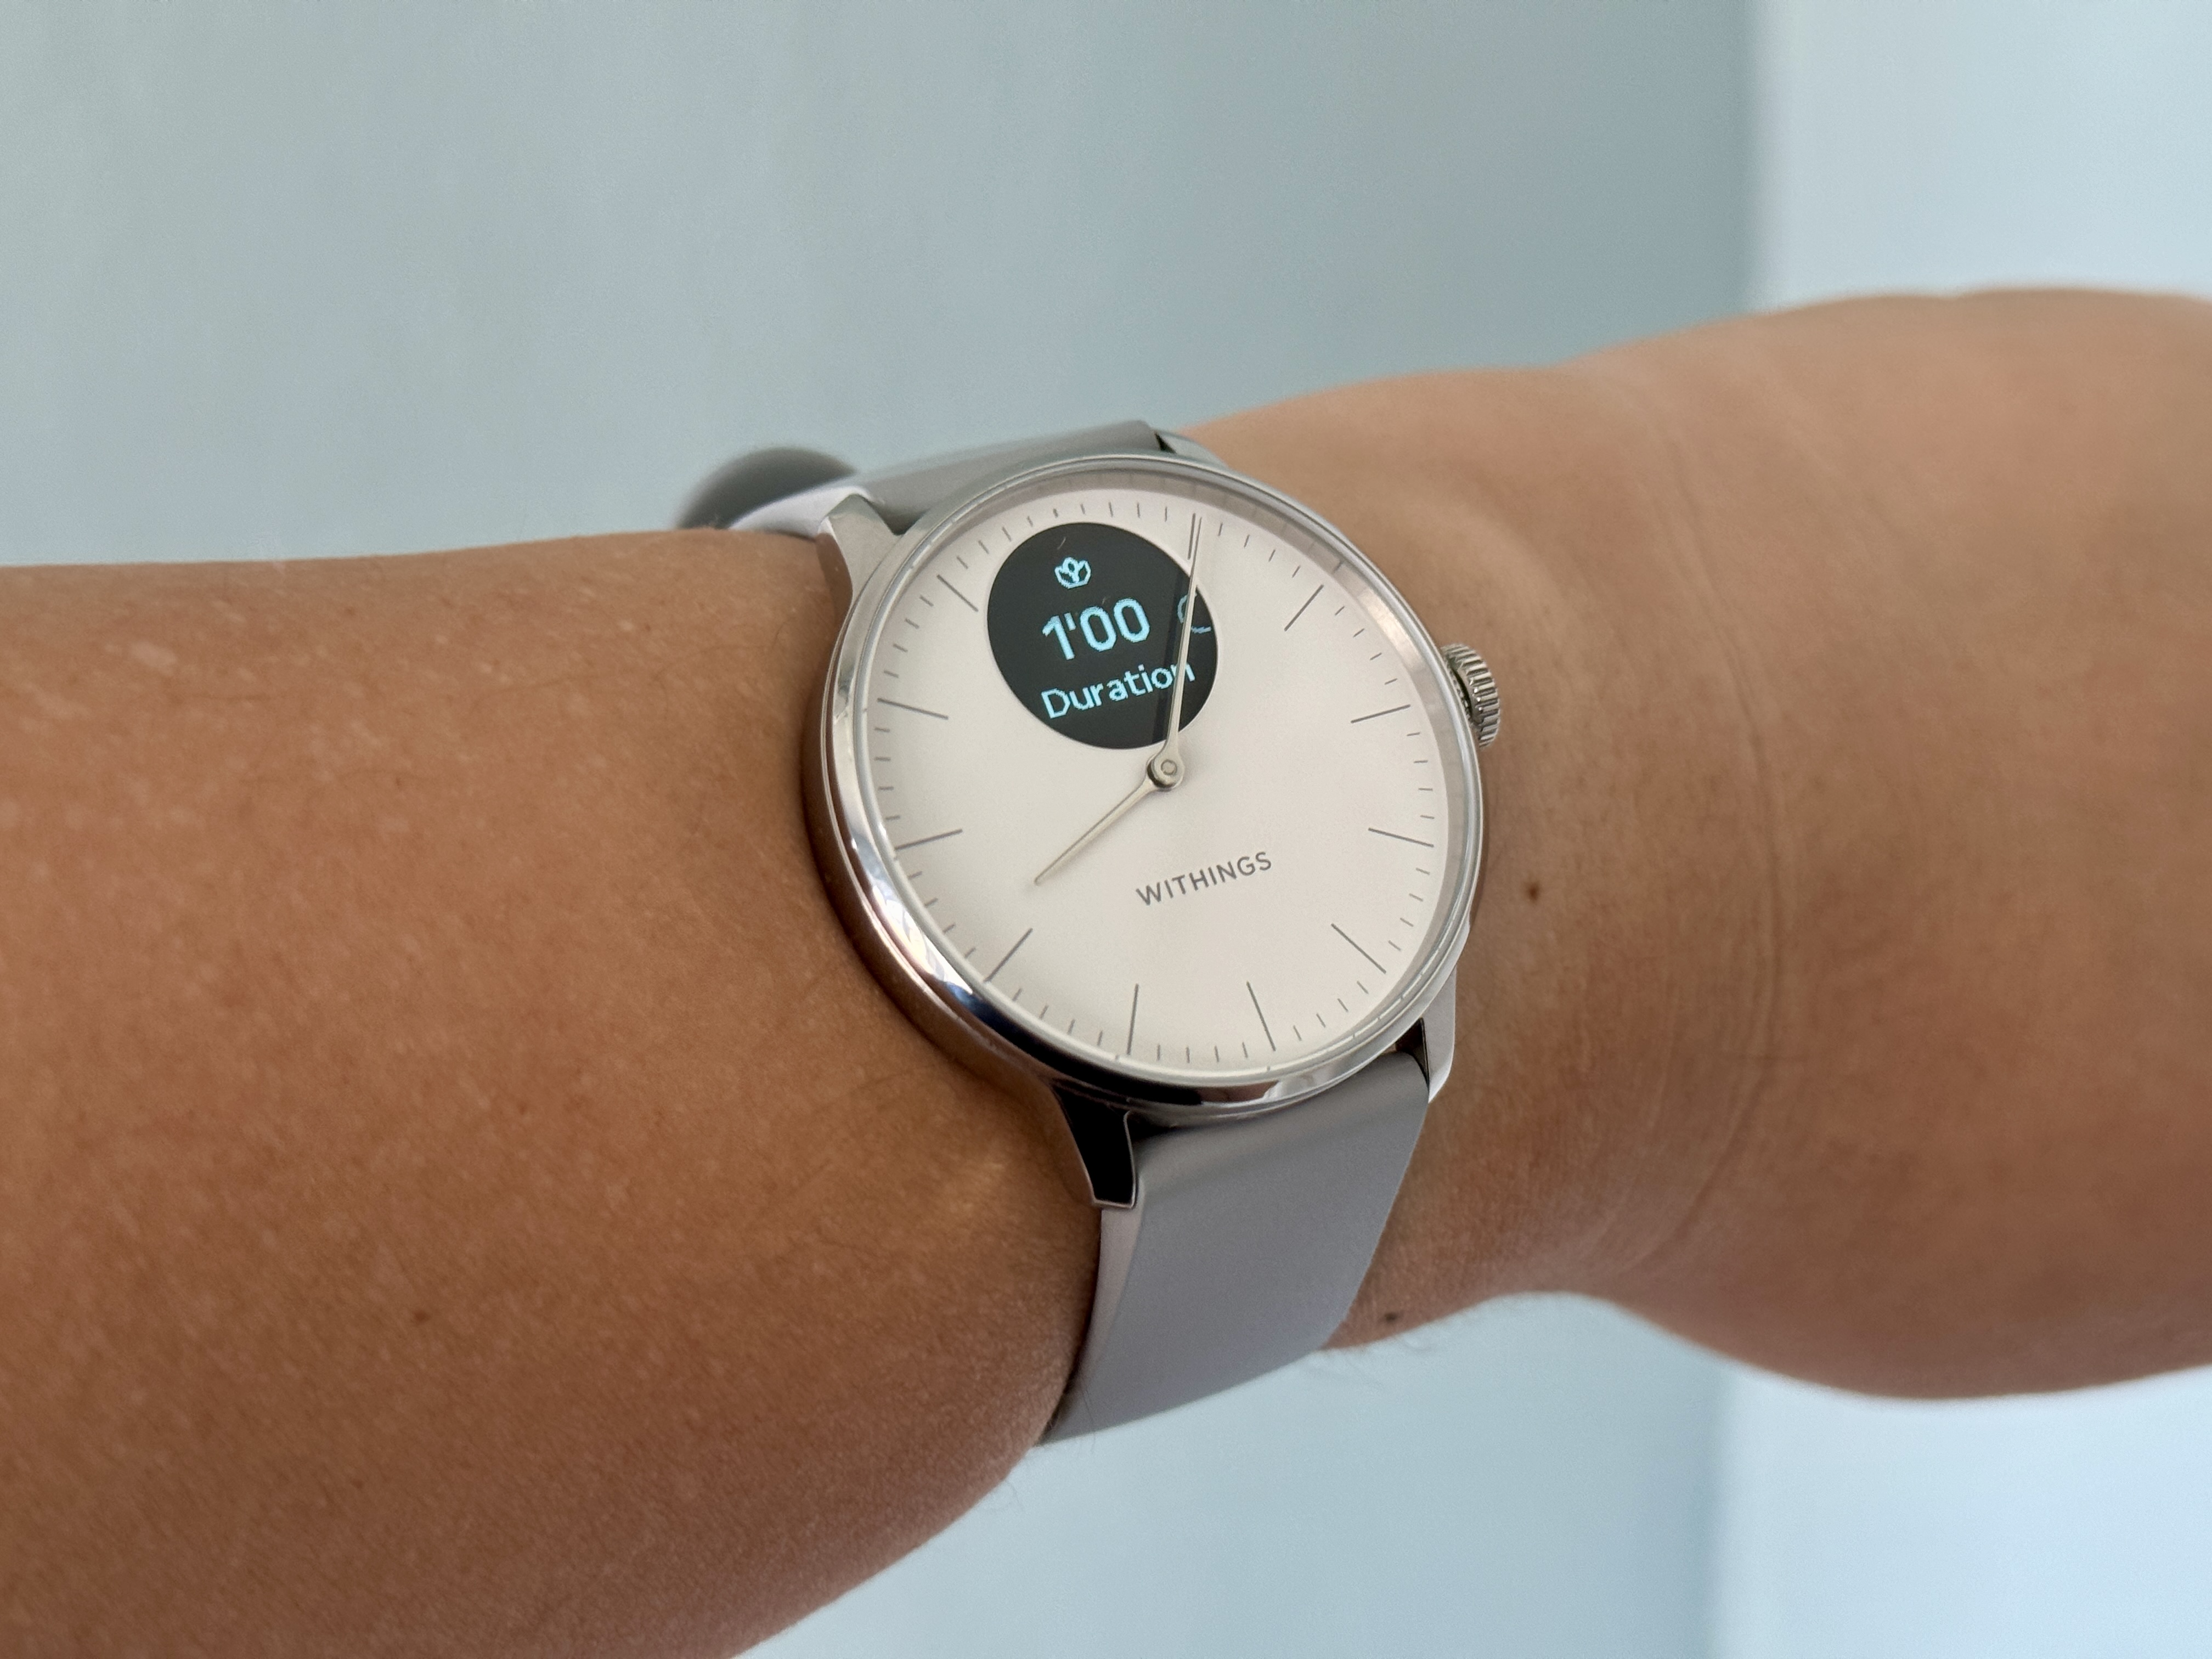 Withings ScanWatch Light watch face showing the Breathe exercise.